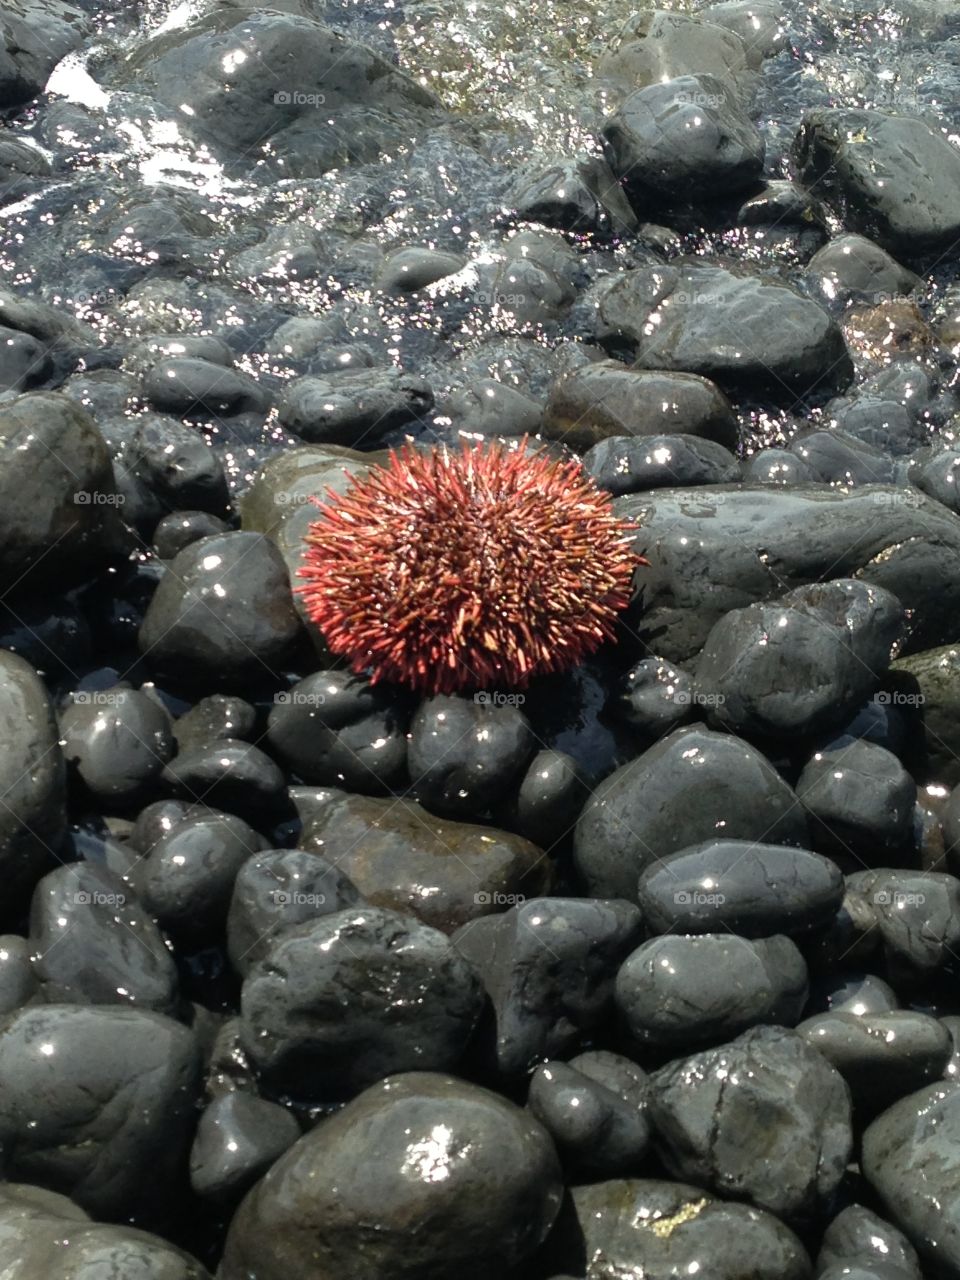 Bright red sea urchin washed ashore on the rocky coast.